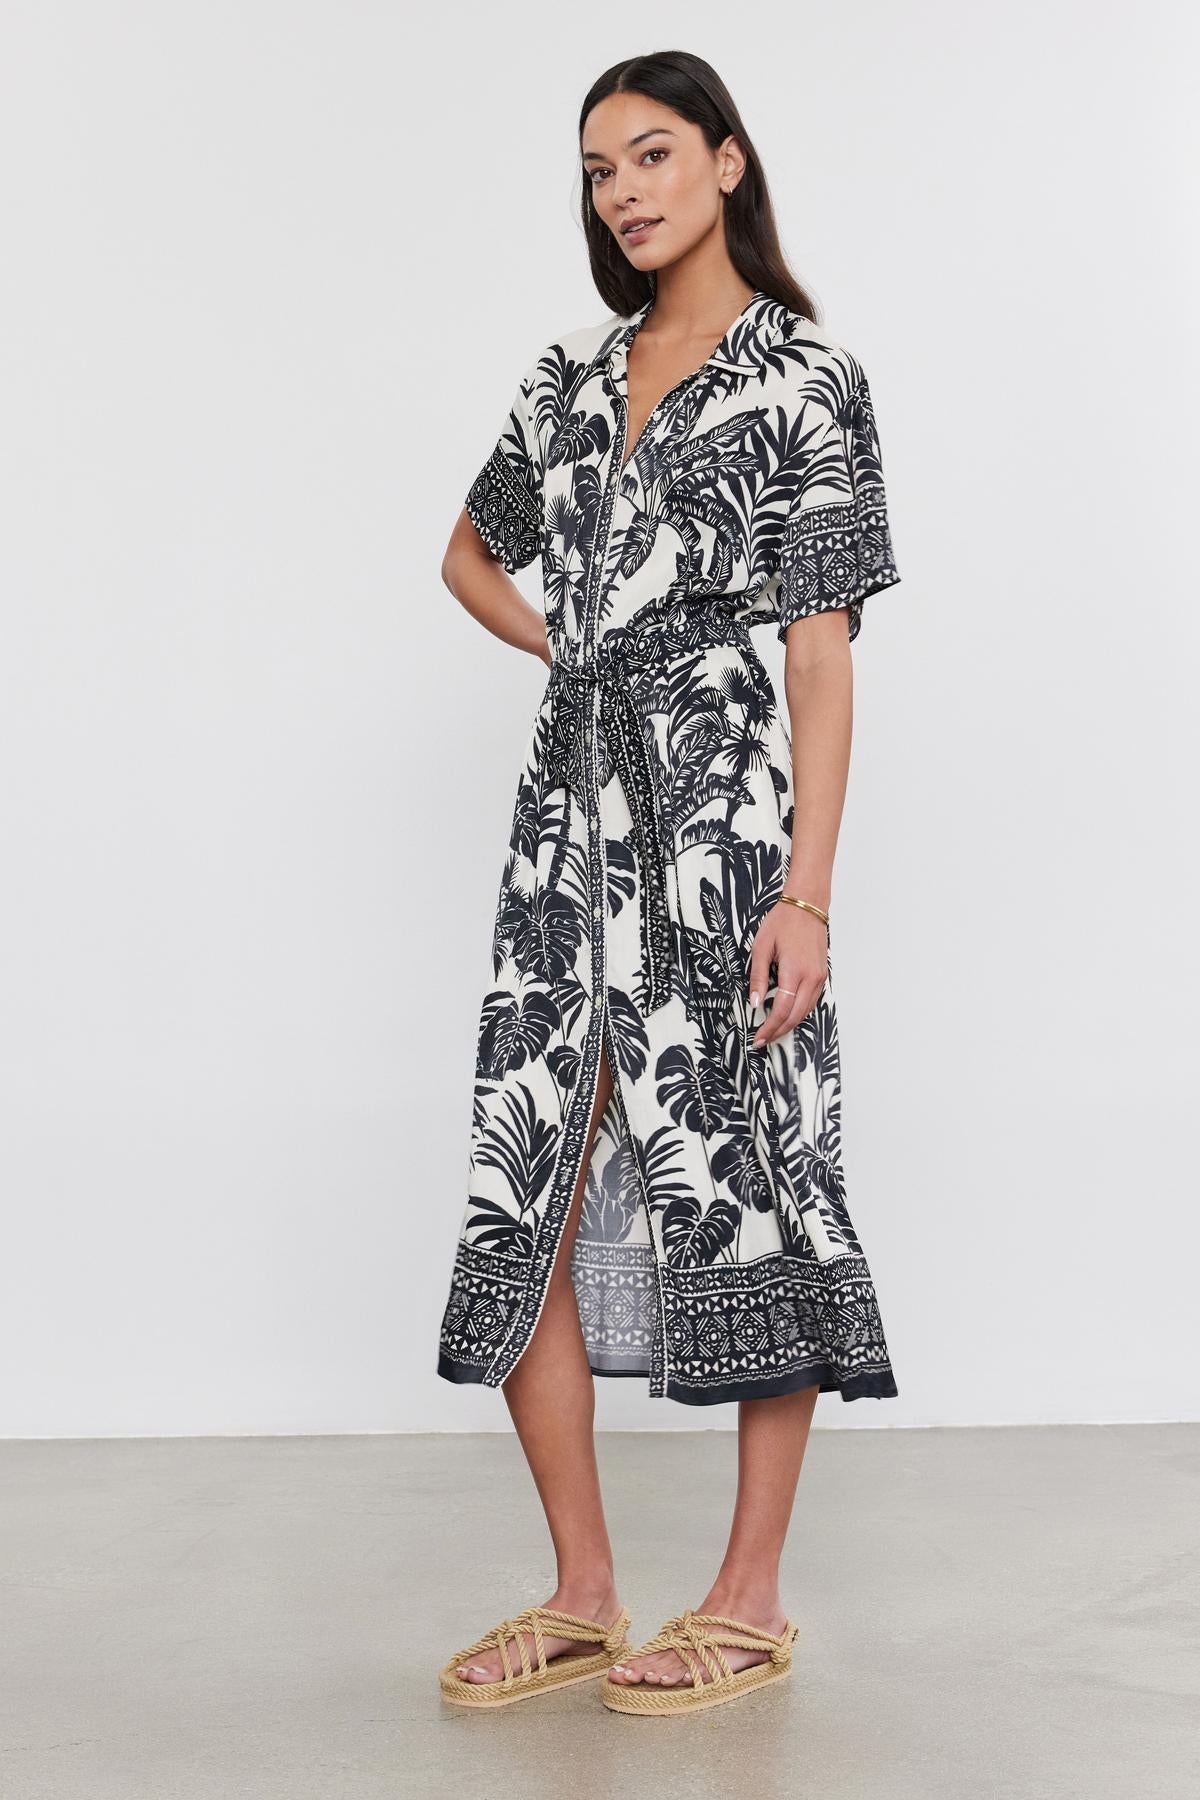 A woman in a black and white palm print Velvet by Graham & Spencer FREYA DRESS and straw sandals stands on a plain background.-36910269825217